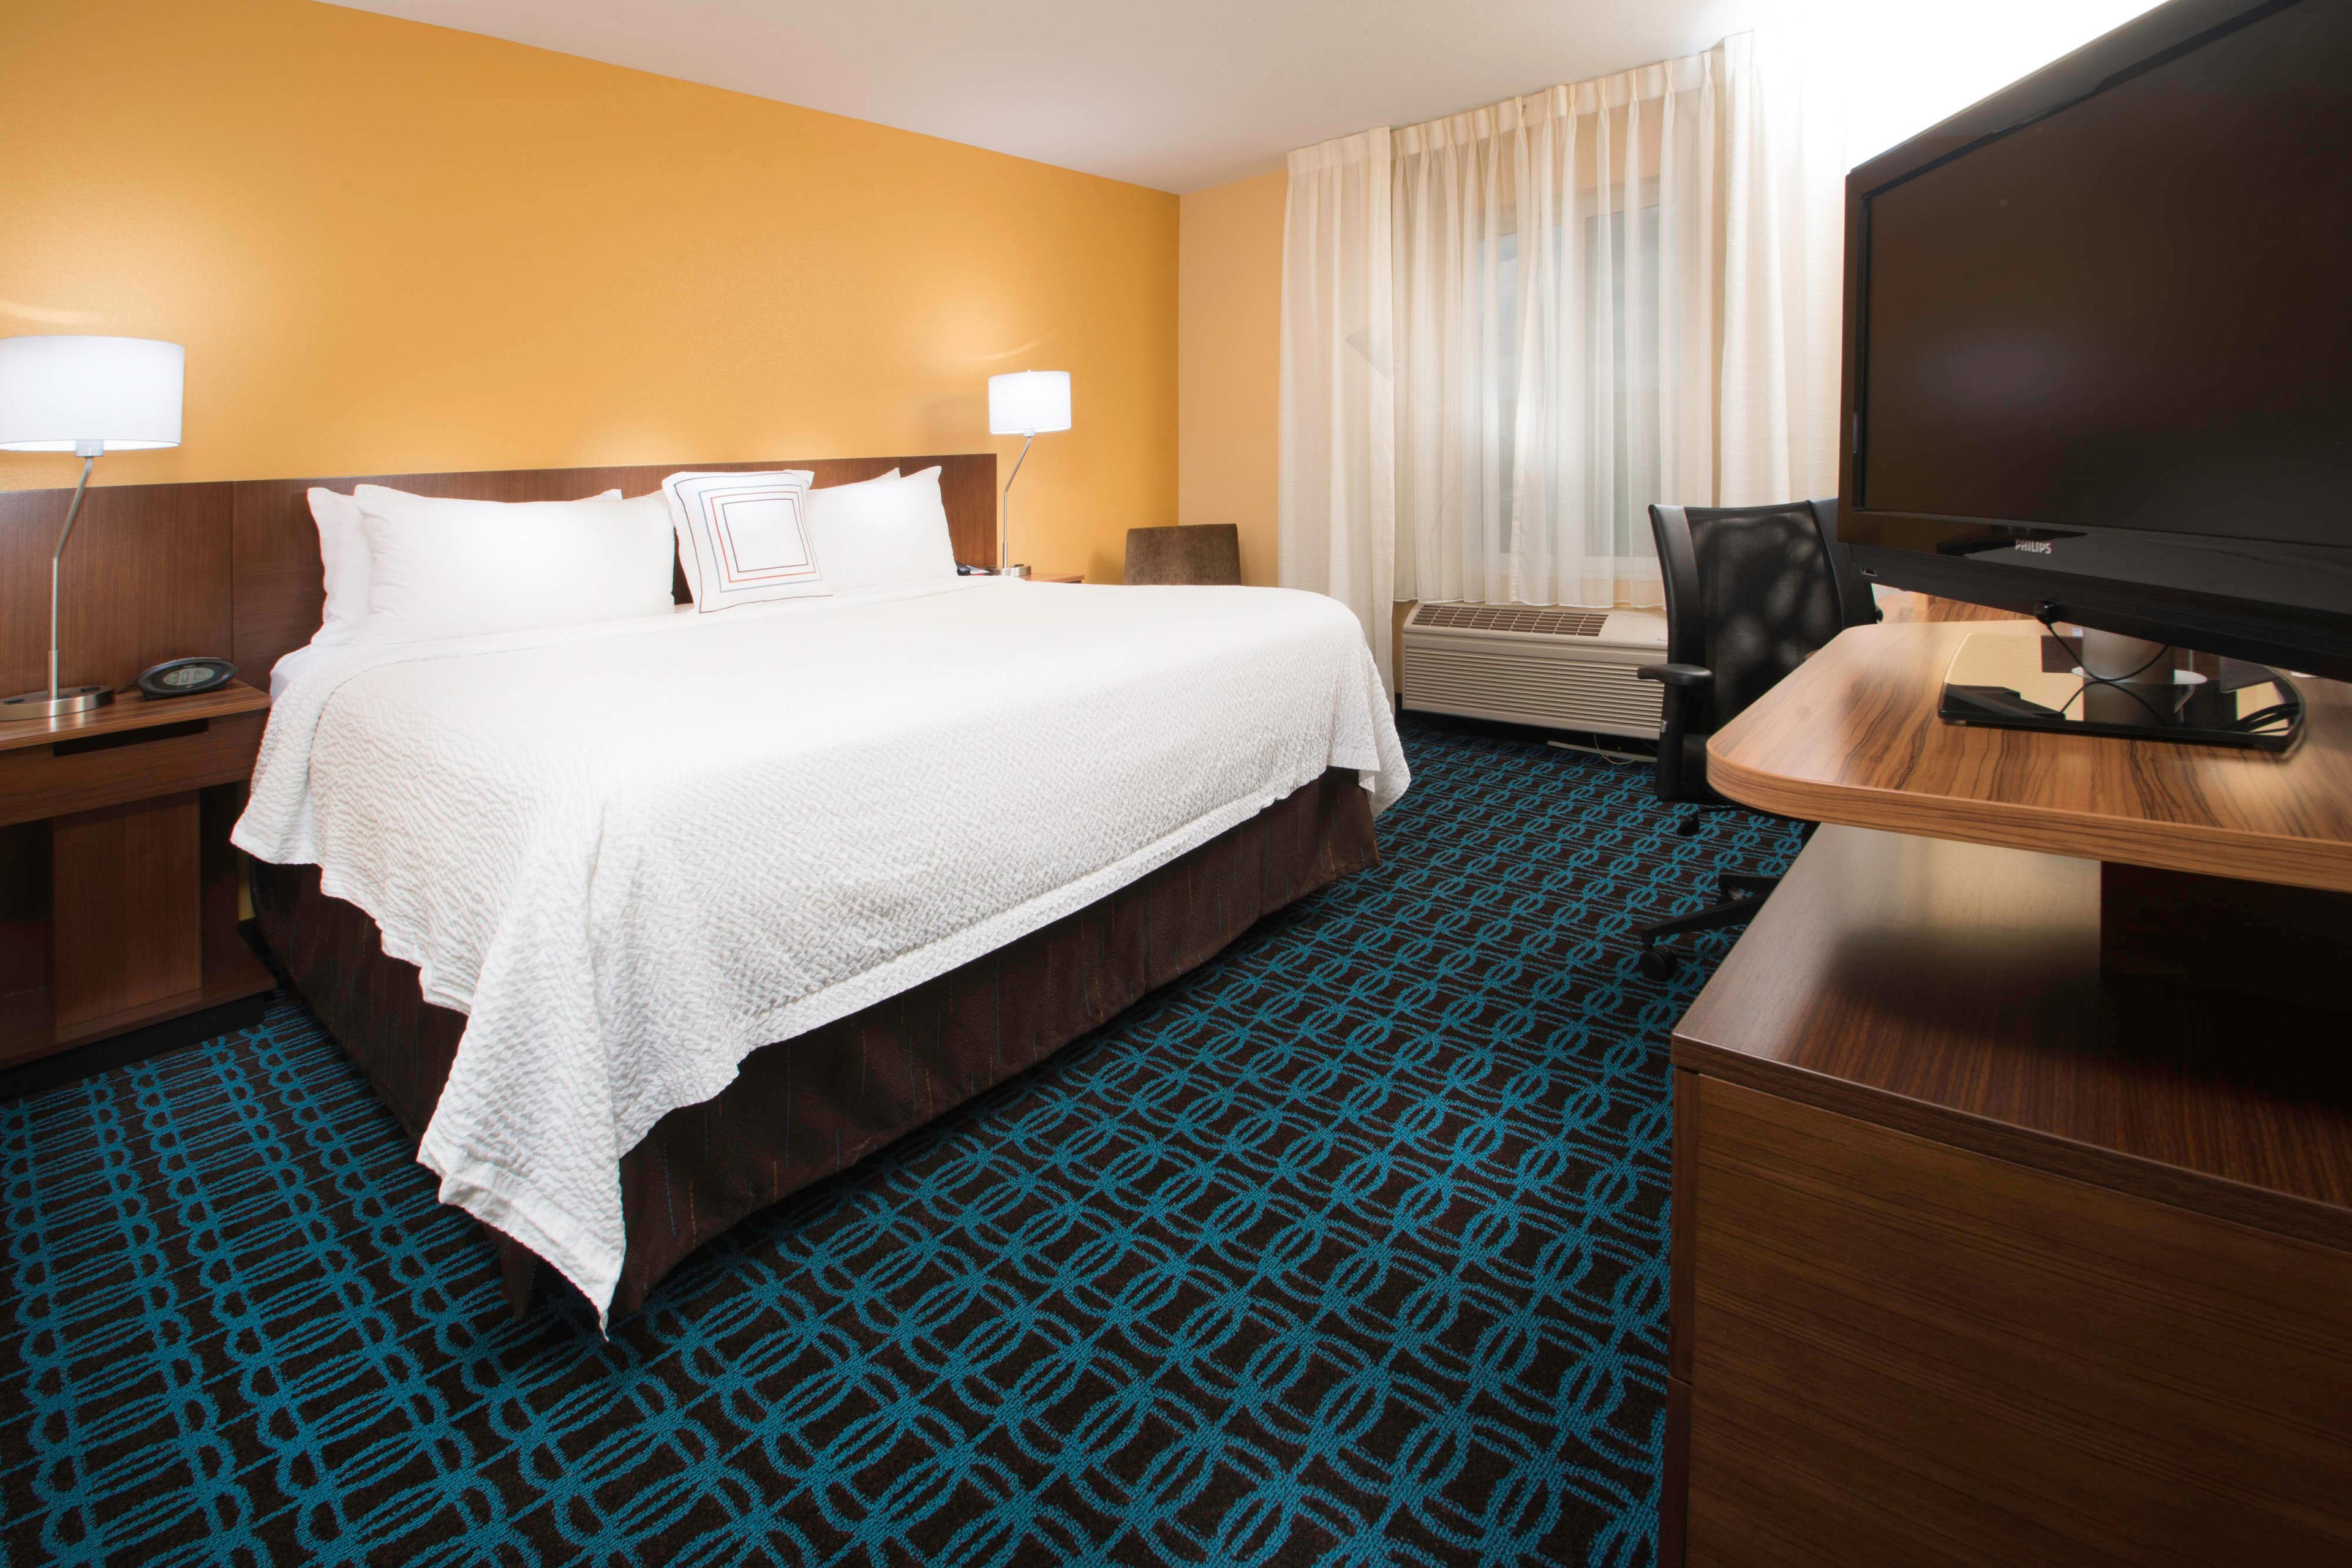 Our king guest room with fresh clean linen, work desk, 42-inch television, refrigerator and microwave.